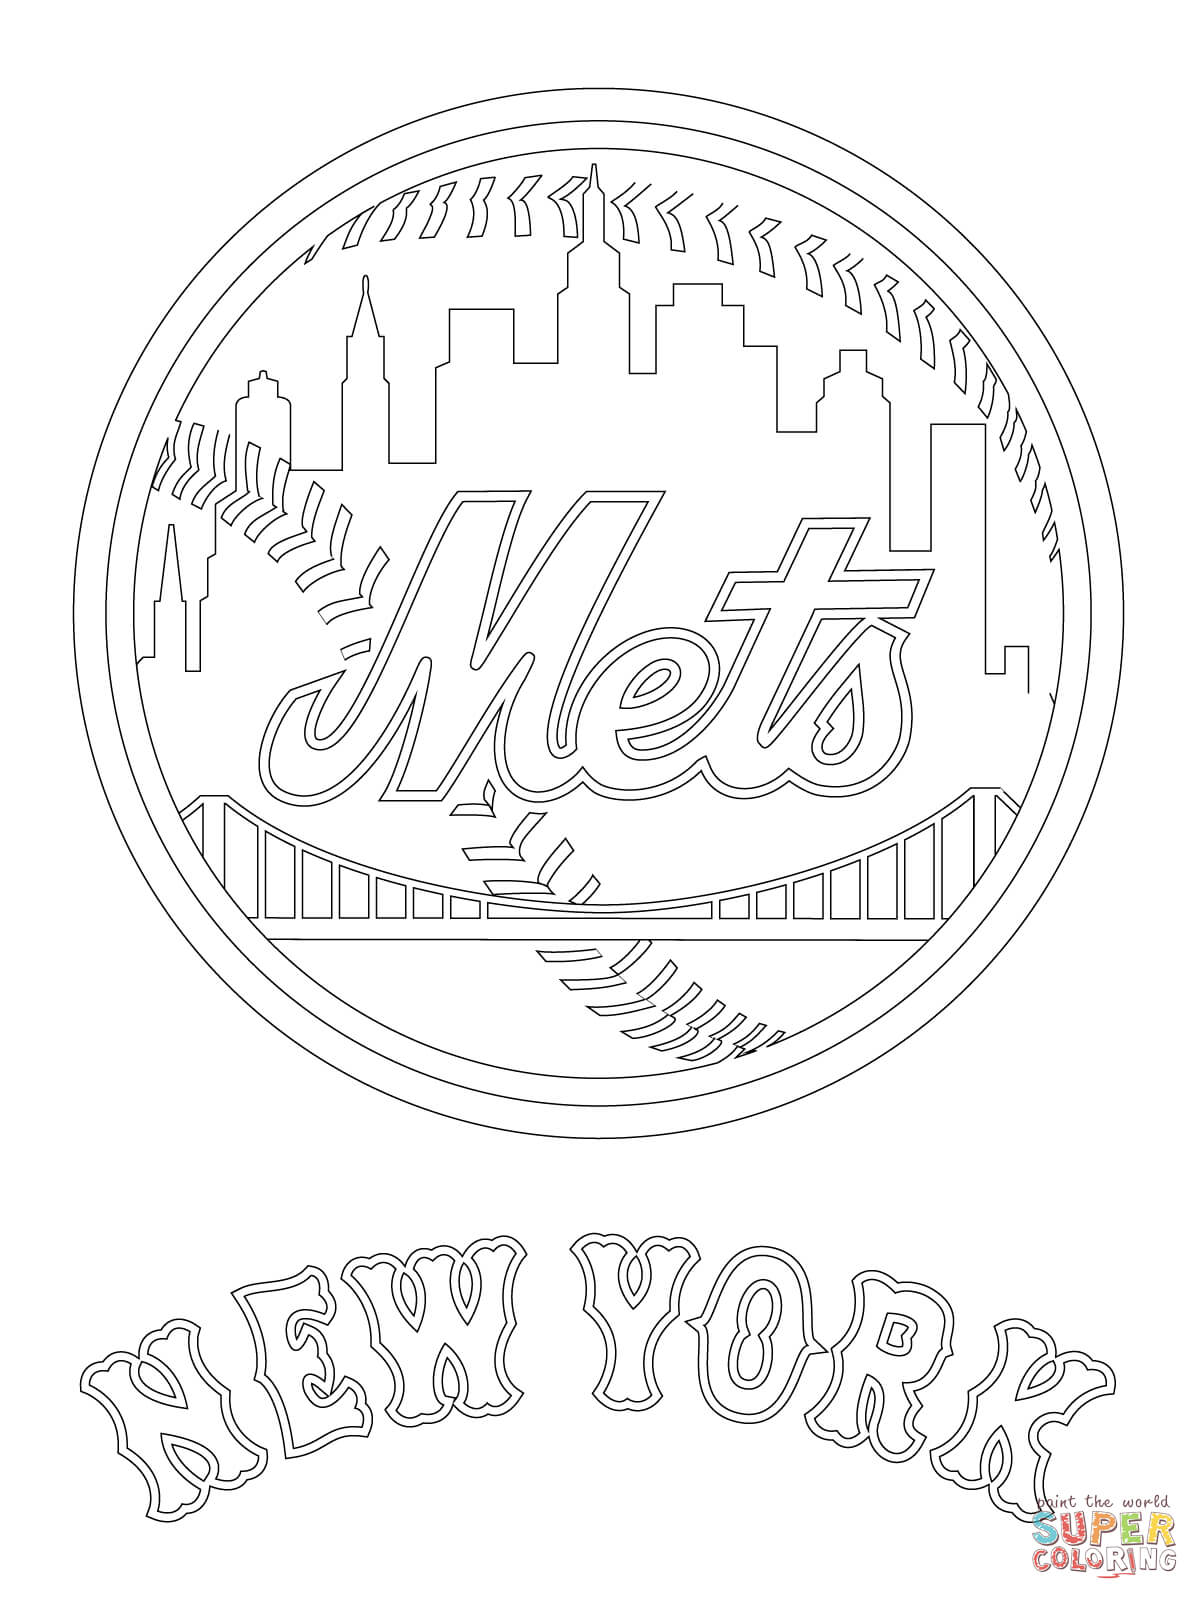 New york mets logo coloring page free printable coloring pages